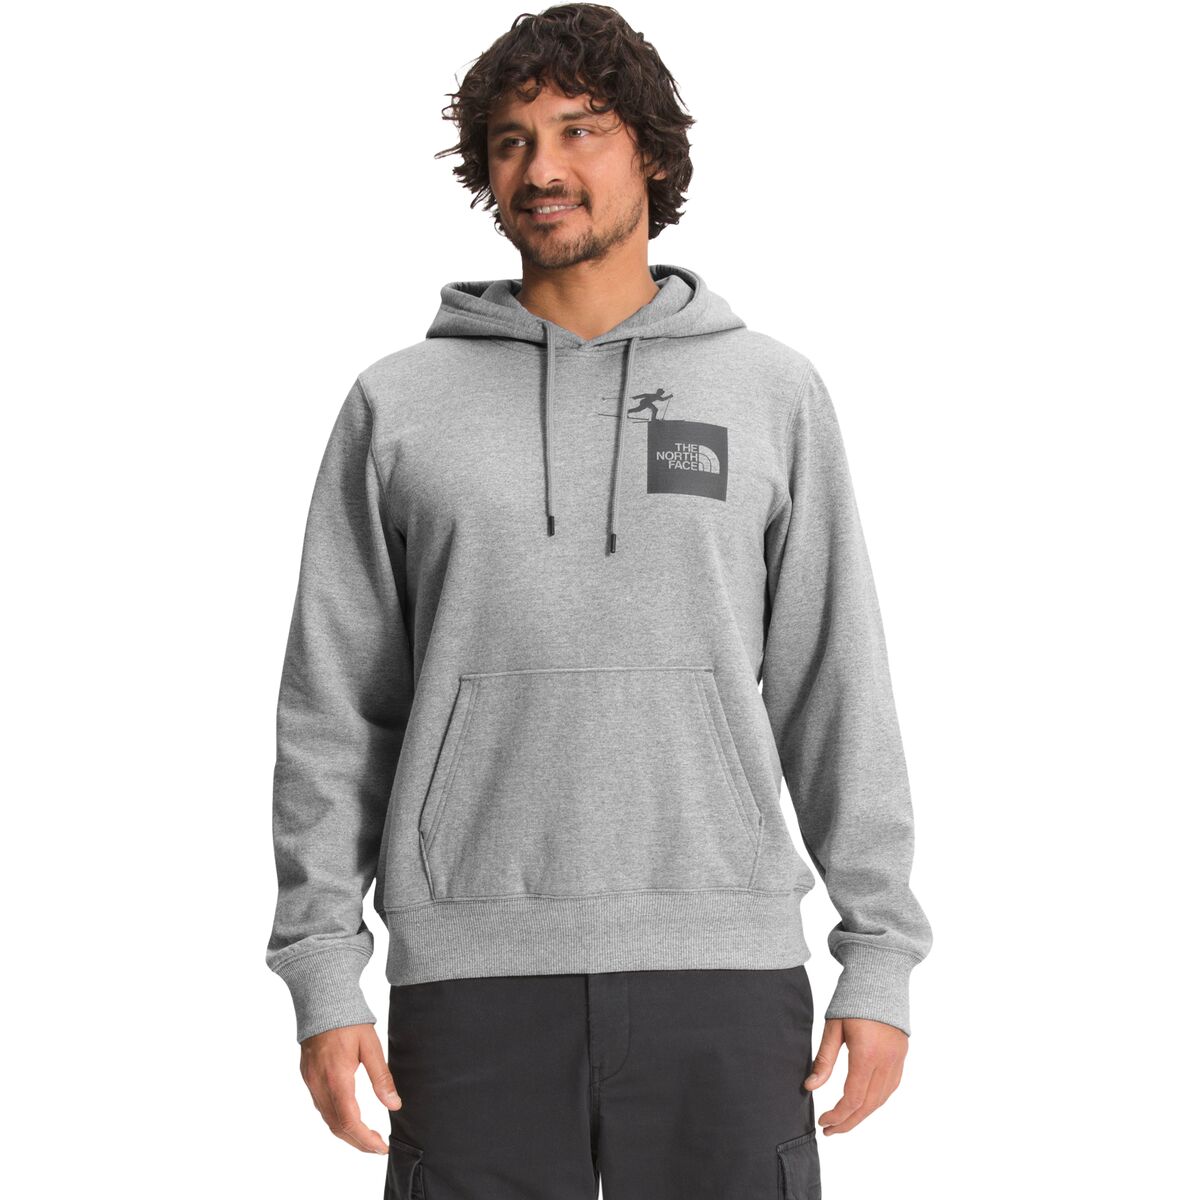 The North Face Altitude Problem Hoodie - Men's